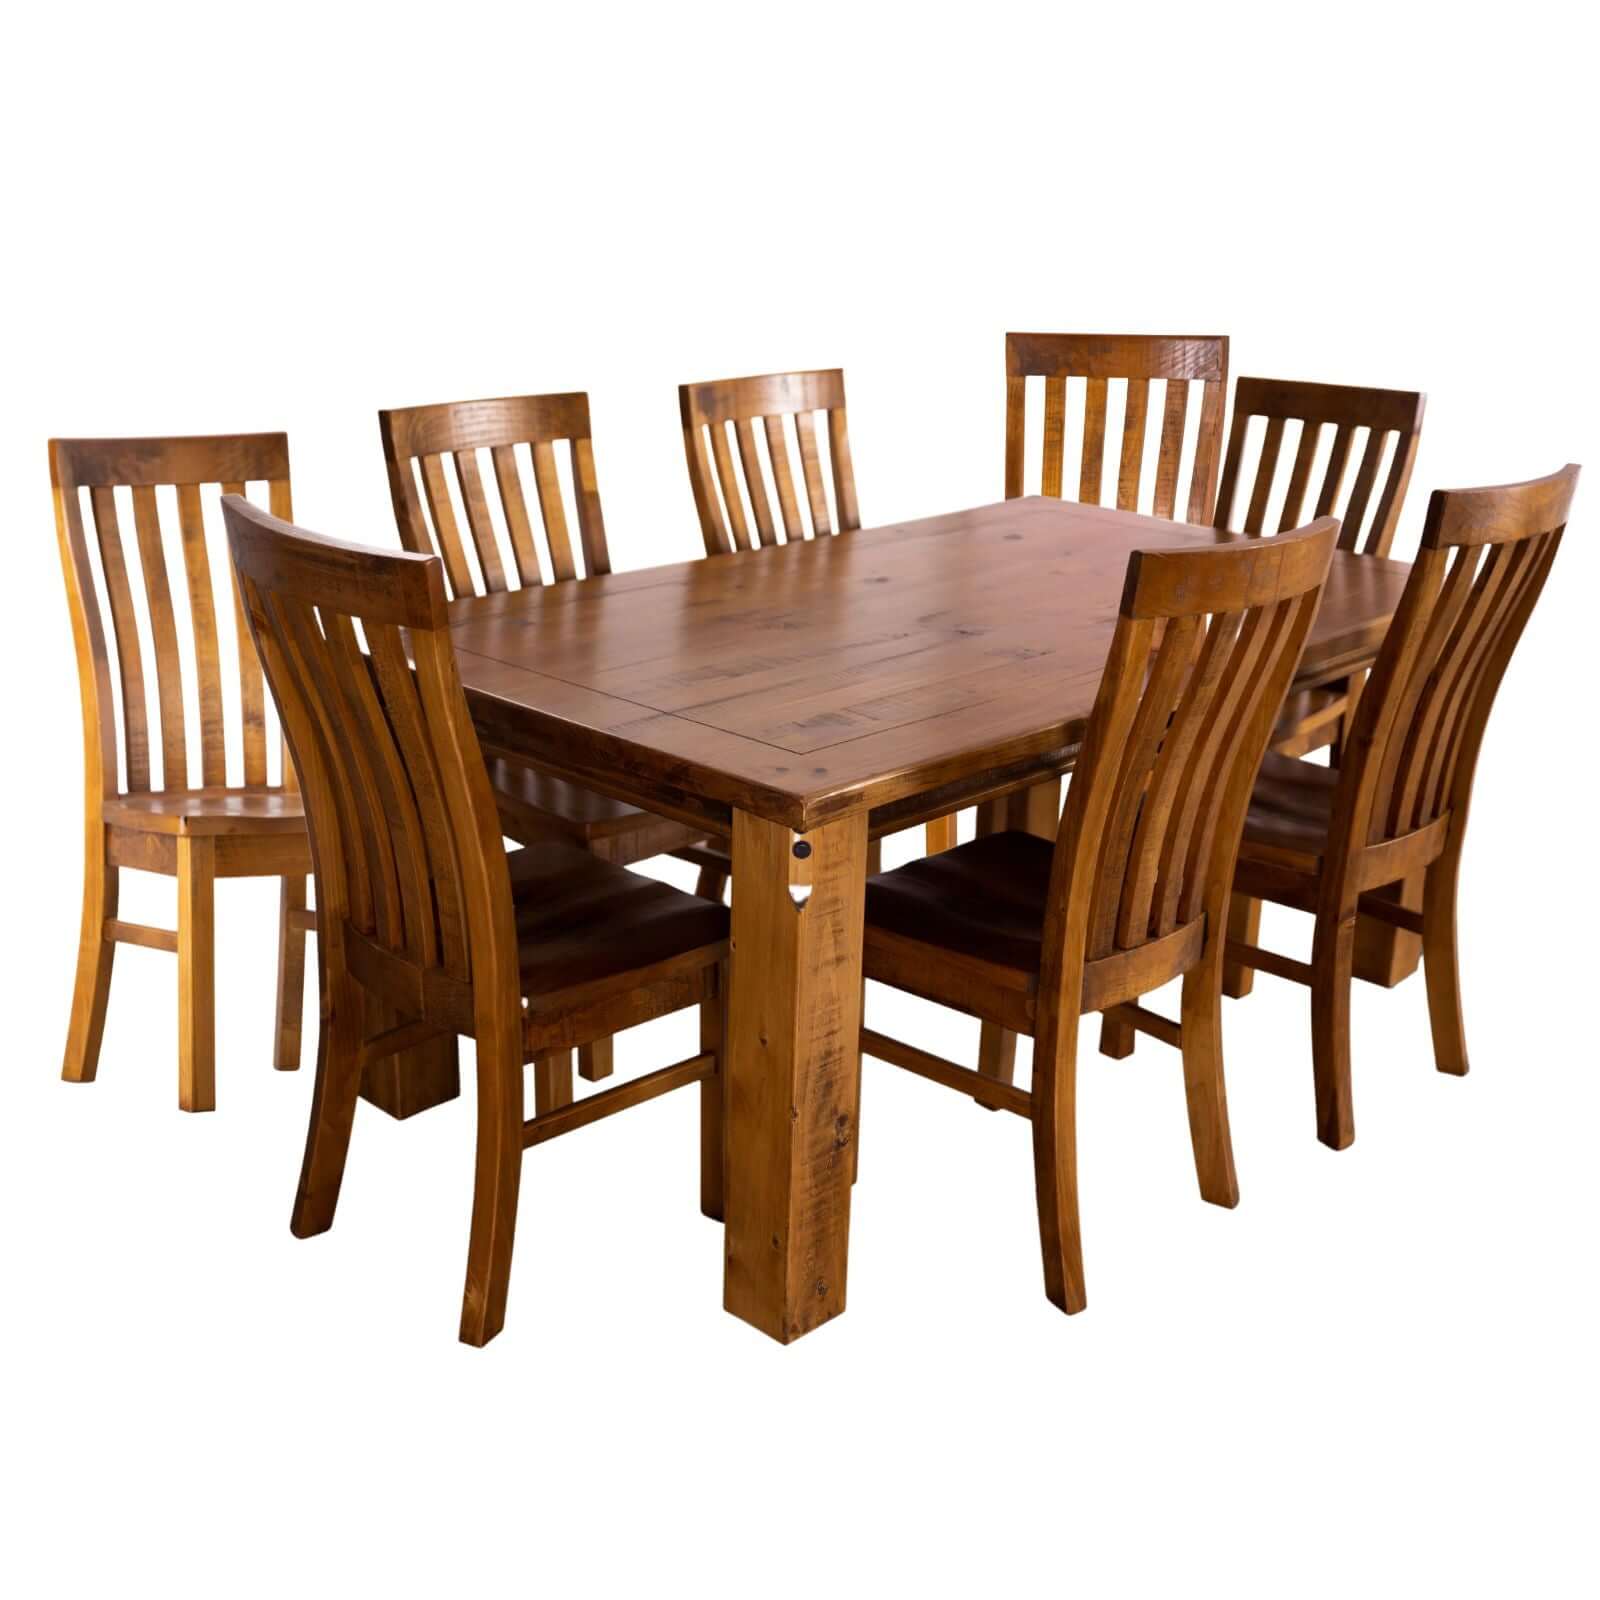 Teasel Dining Table 210cm Solid Pine Timber Wood Furniture - Rustic Oak-Upinteriors